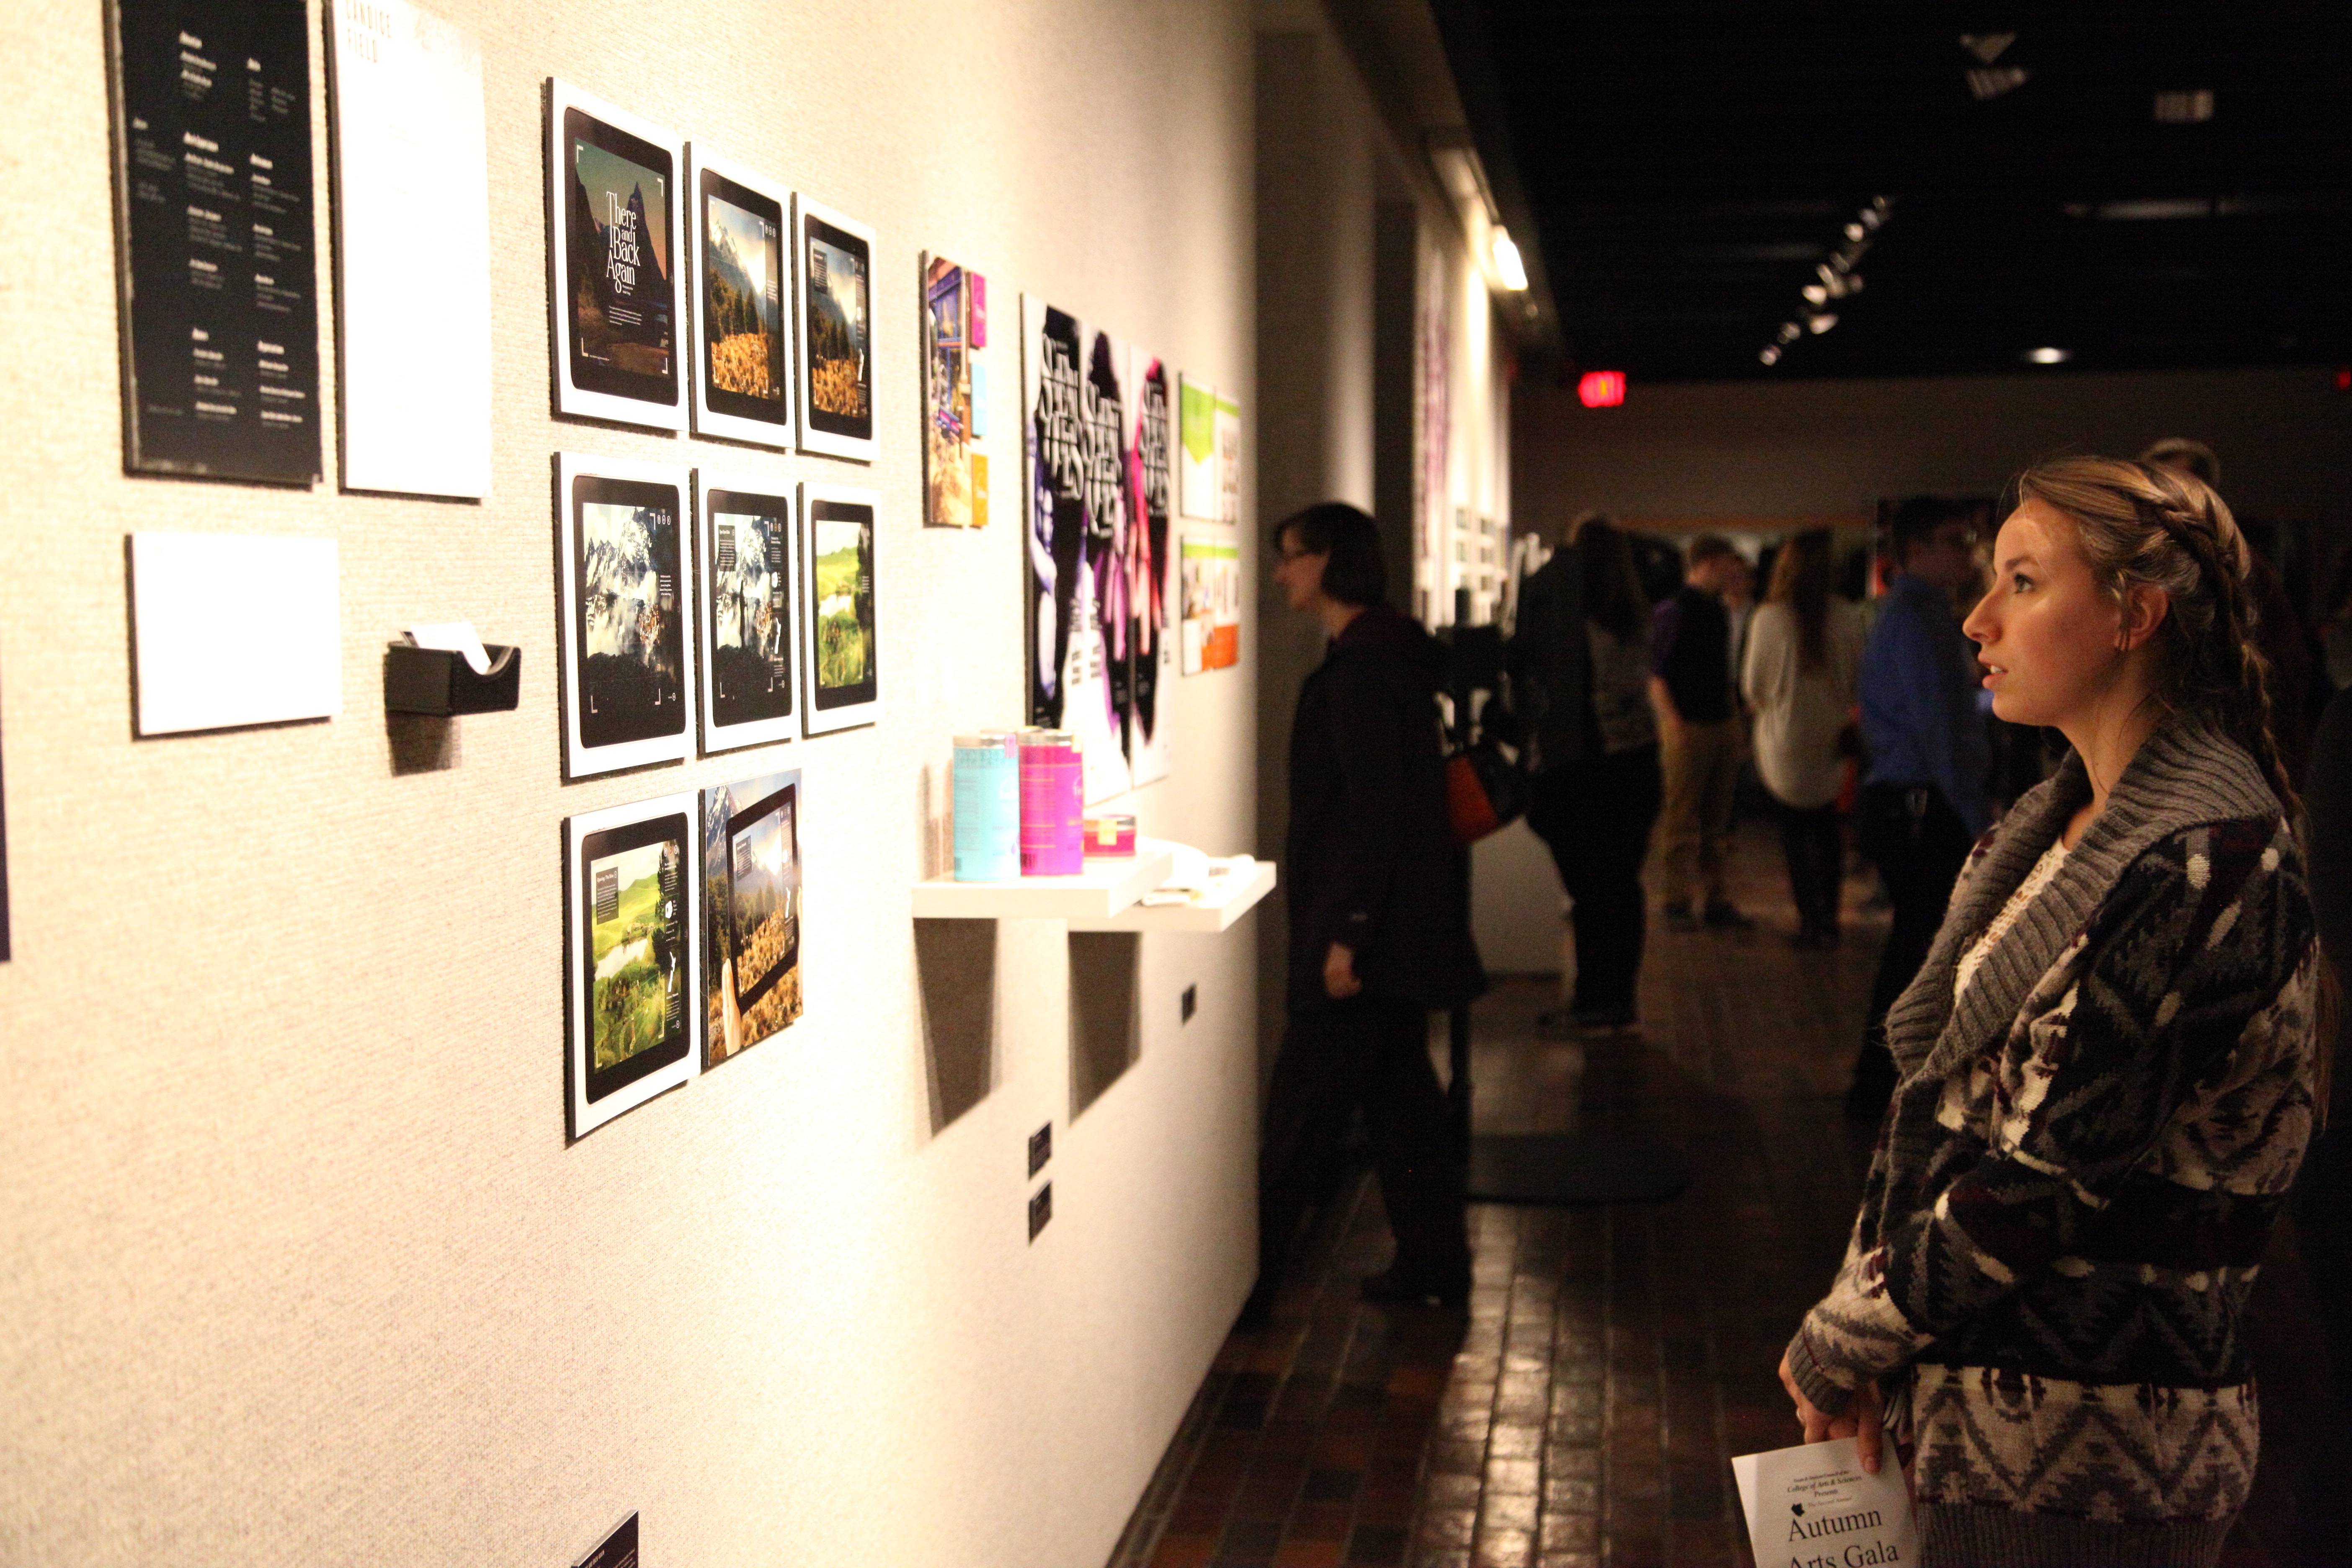 Senior art pieces were on exhibit at the post-reception in the Gardiner Art Gallery.